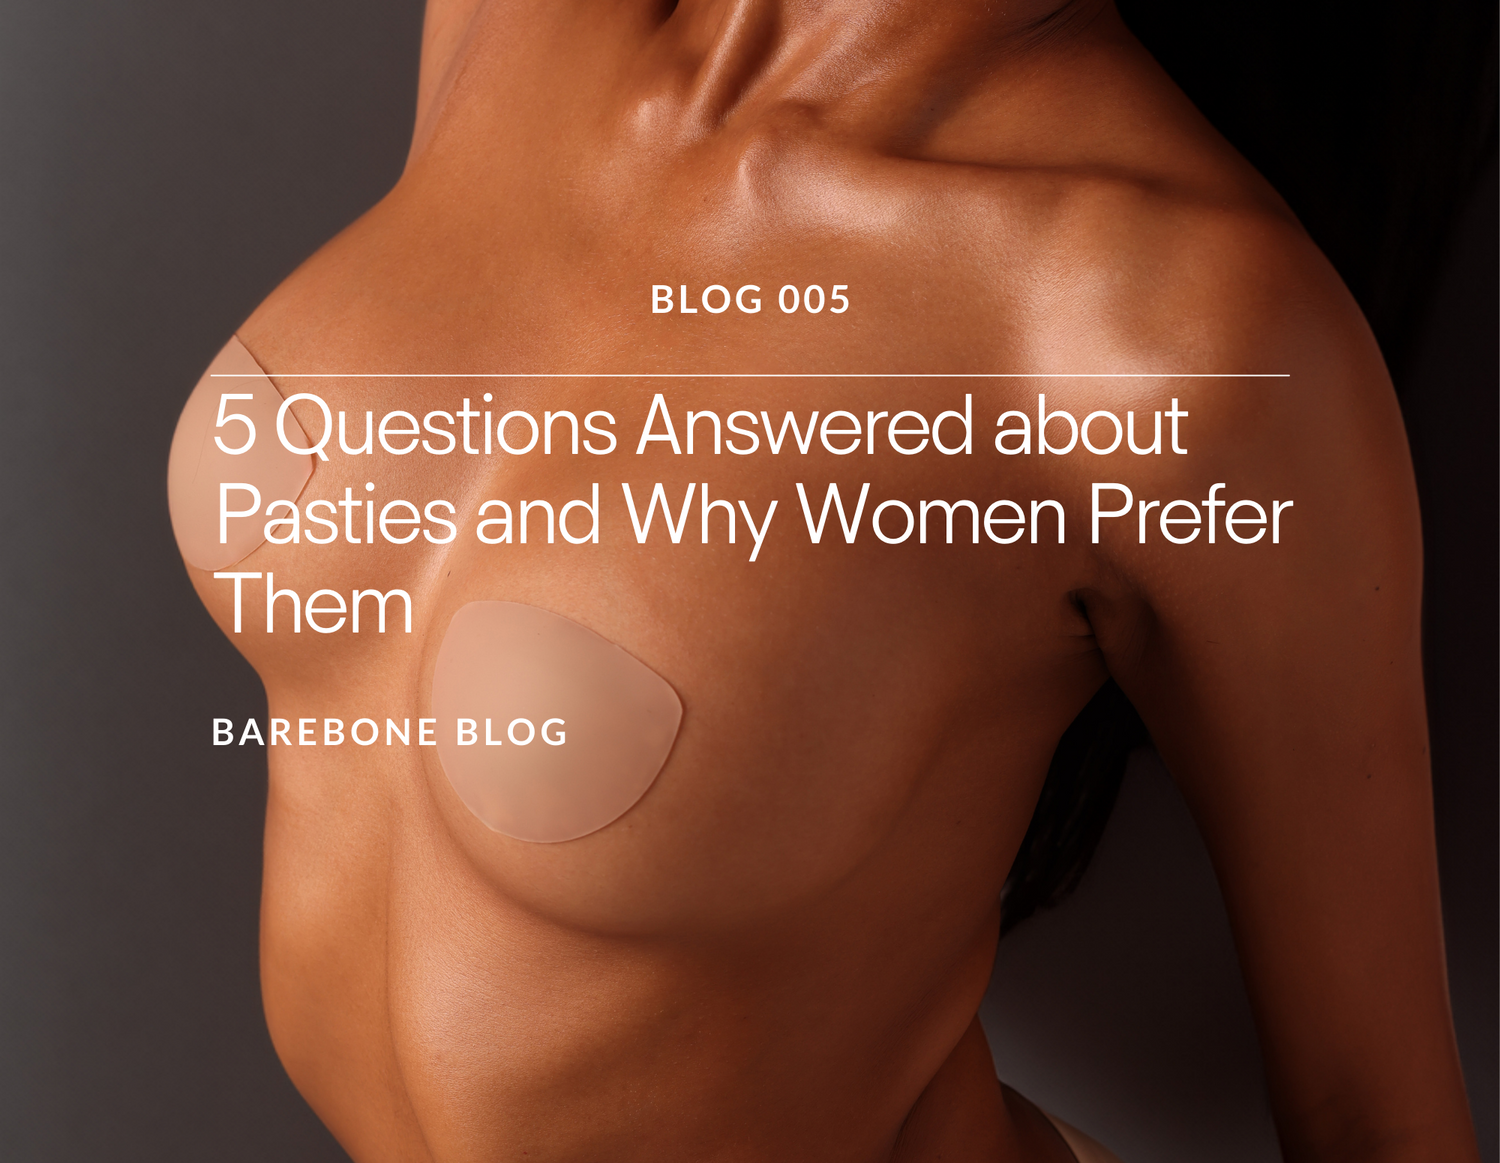 5 Questions Answered about Pasties and Why Women Prefer Them